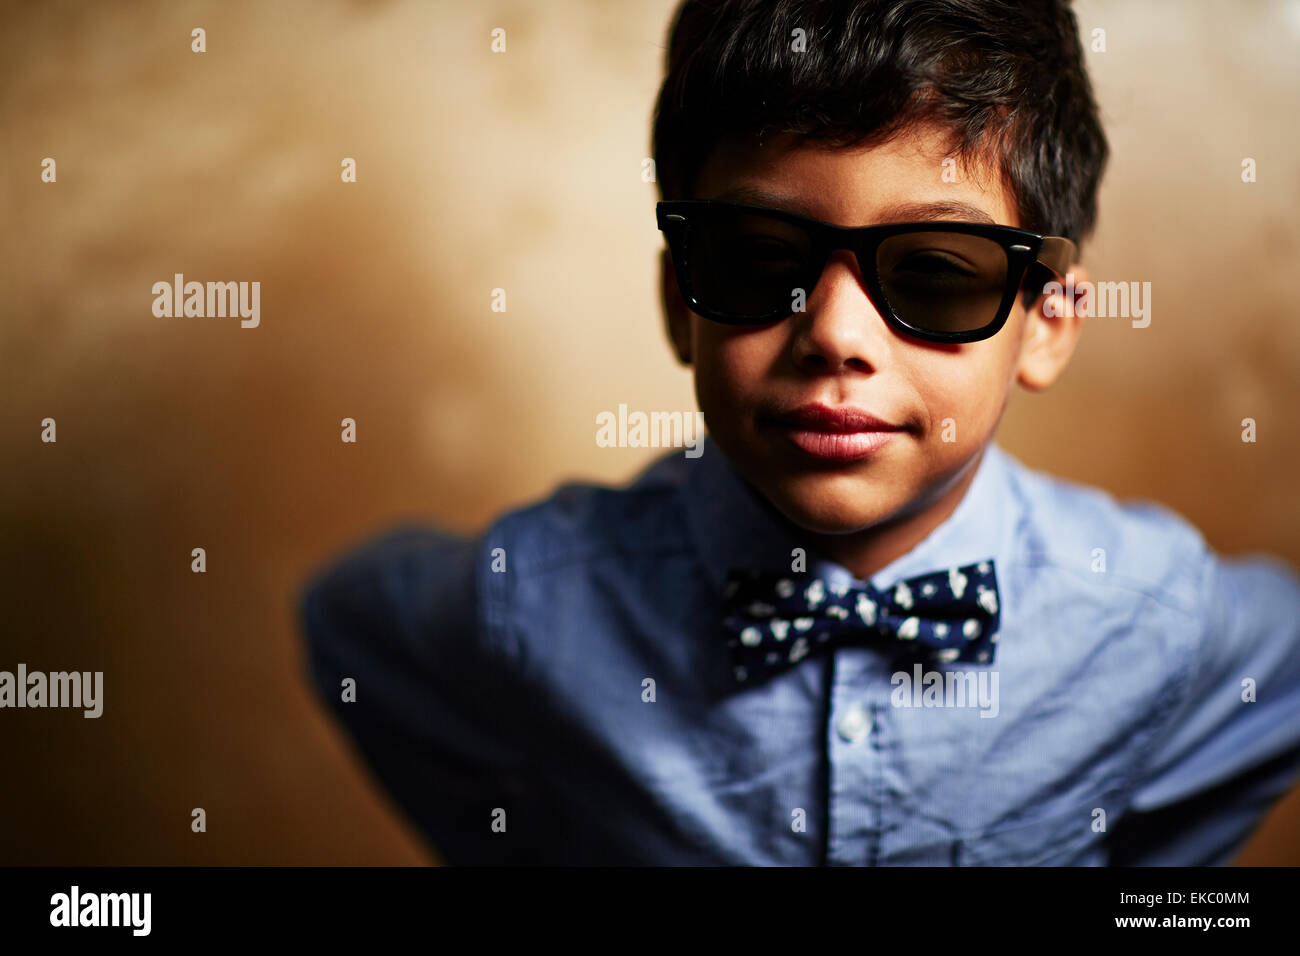 Boy wearing sunglasses and bow tie Stock Photo